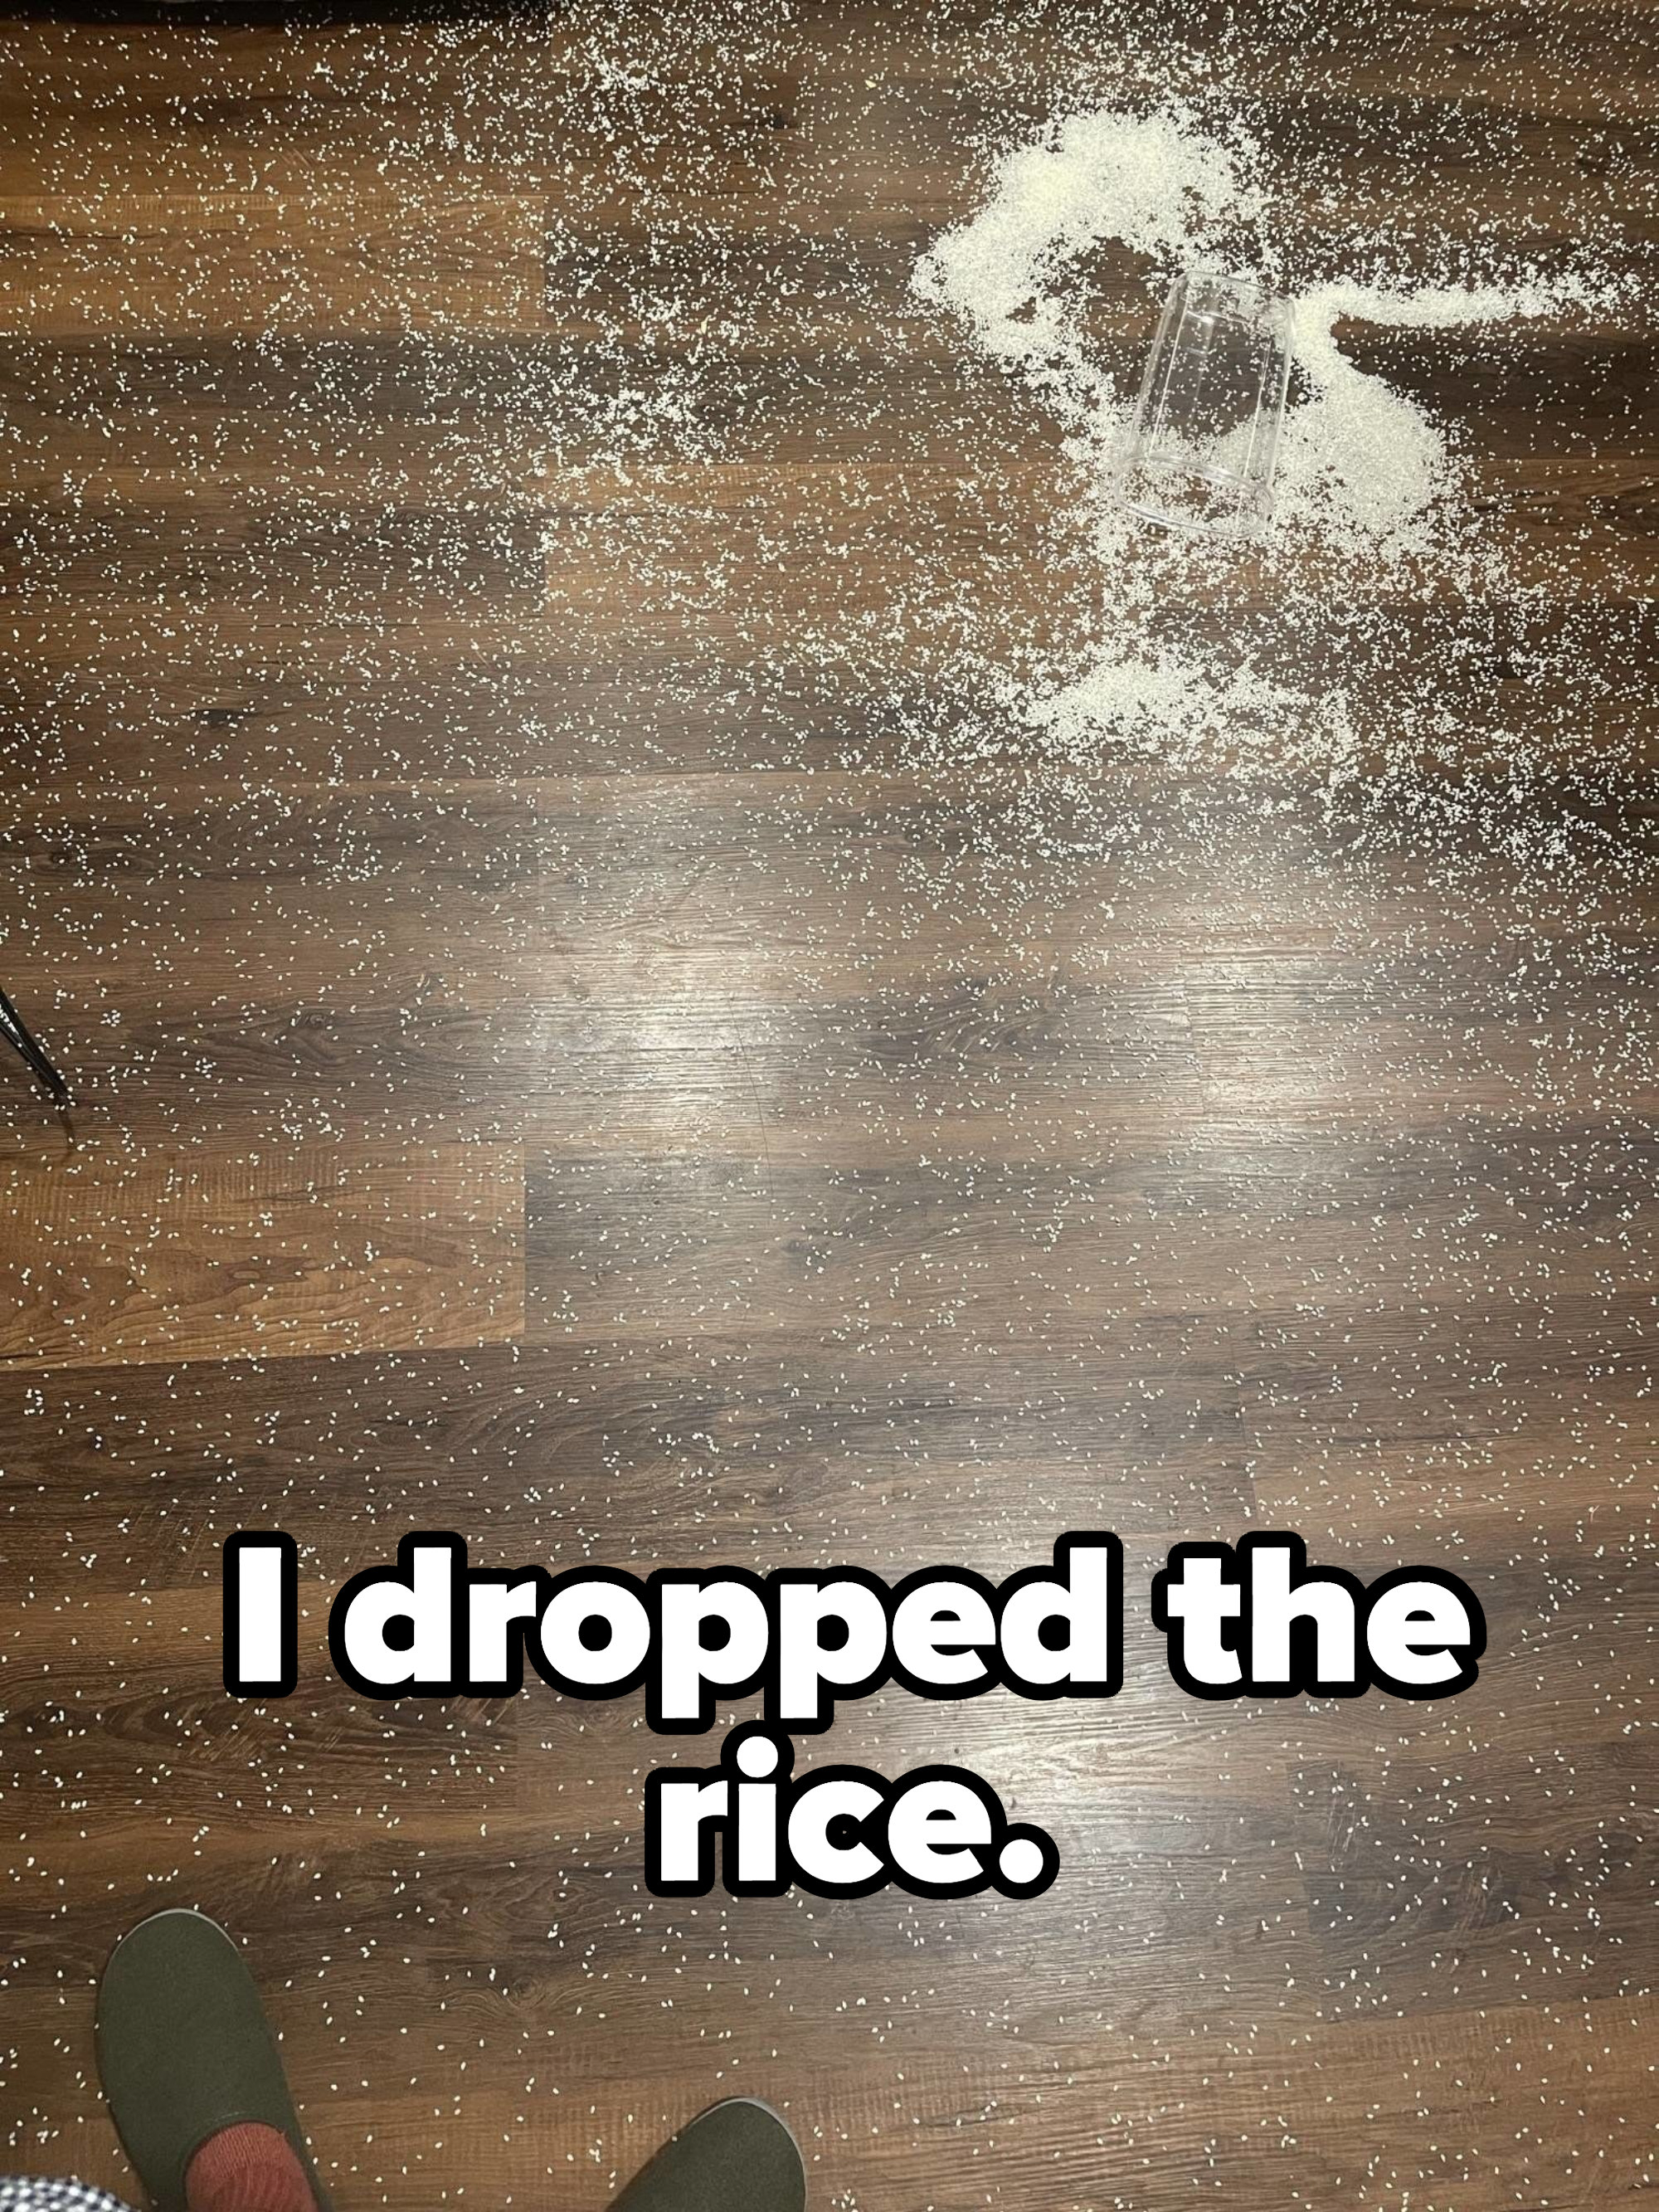 Spilled rice all over the floor